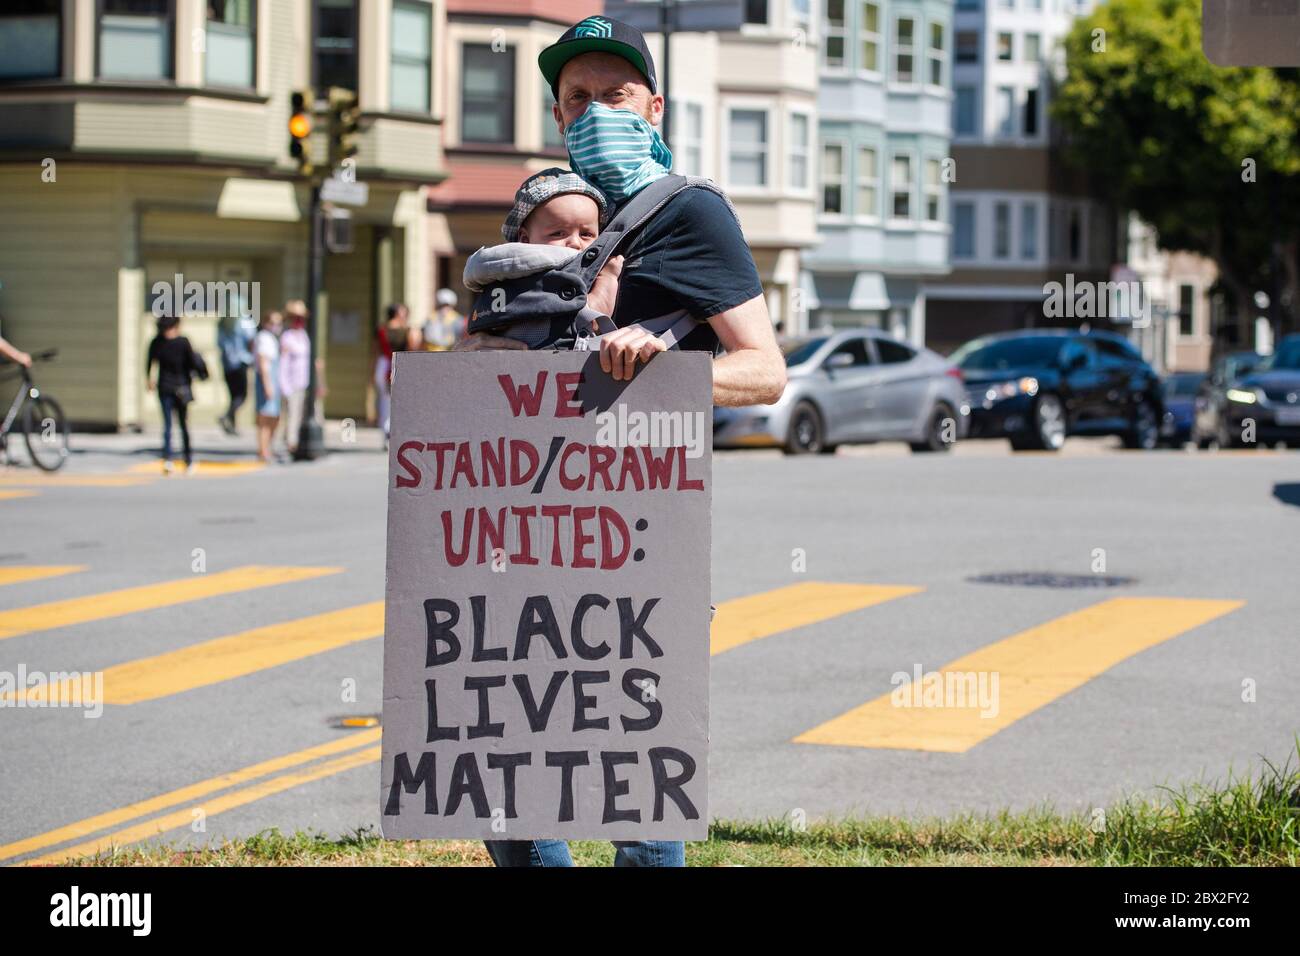 SAN FRANCISCO, CA- JUNE 3: A father and child protest at Mission High in San Francisco, California on June 3, 2020 after the death of George Floyd. (Photo by Chris Tuite/ImageSPACE) Stock Photo